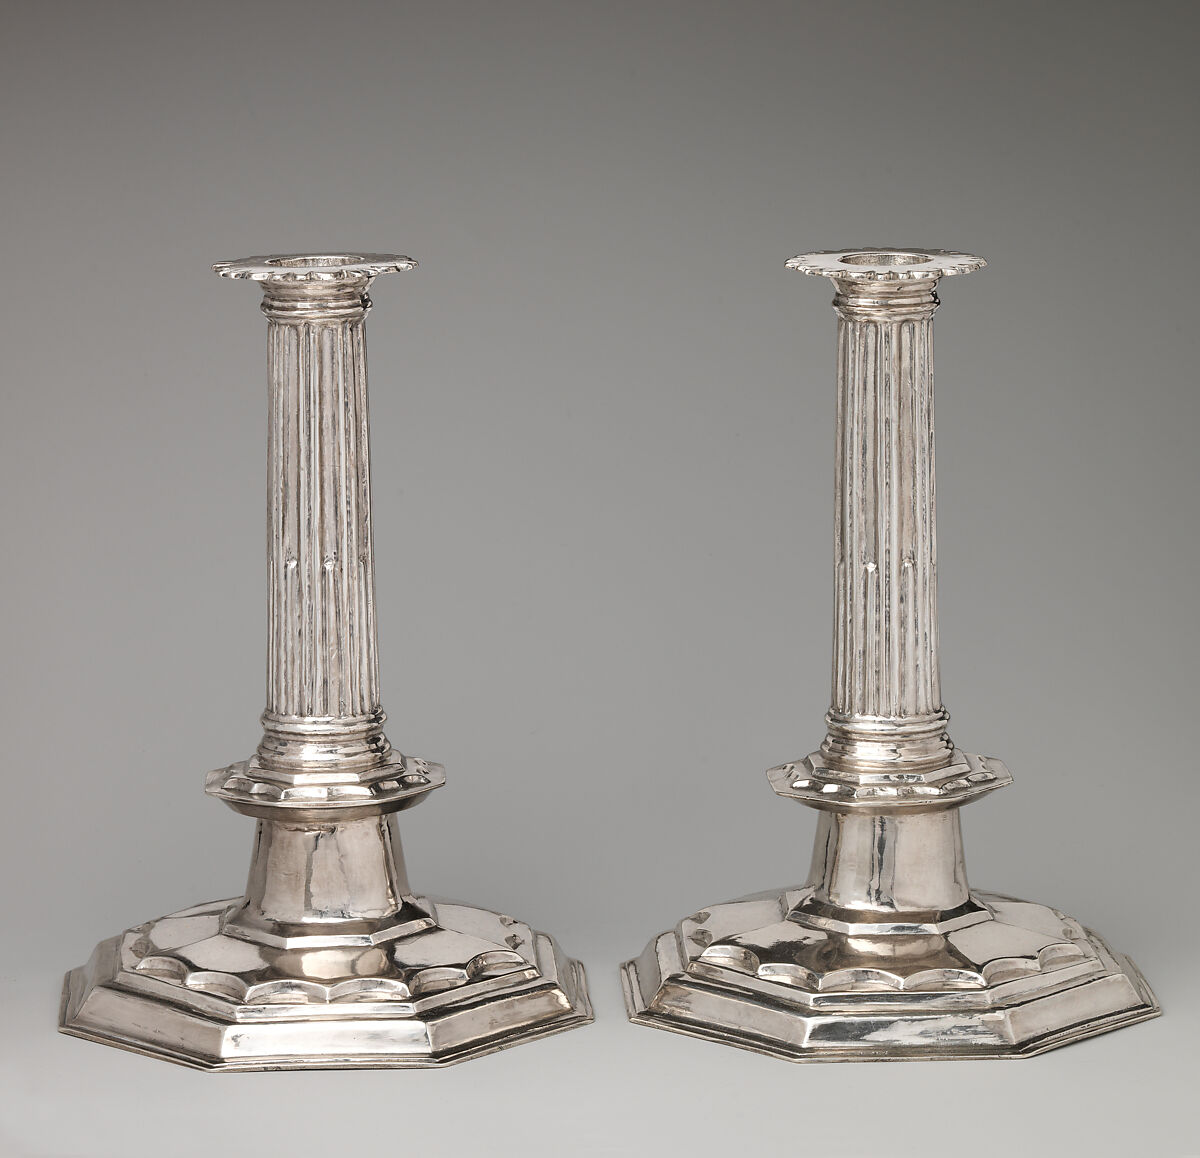 Candlestick (one of a pair), Probably by T. D., London (ca. 1686–1687), Silver, British, London 